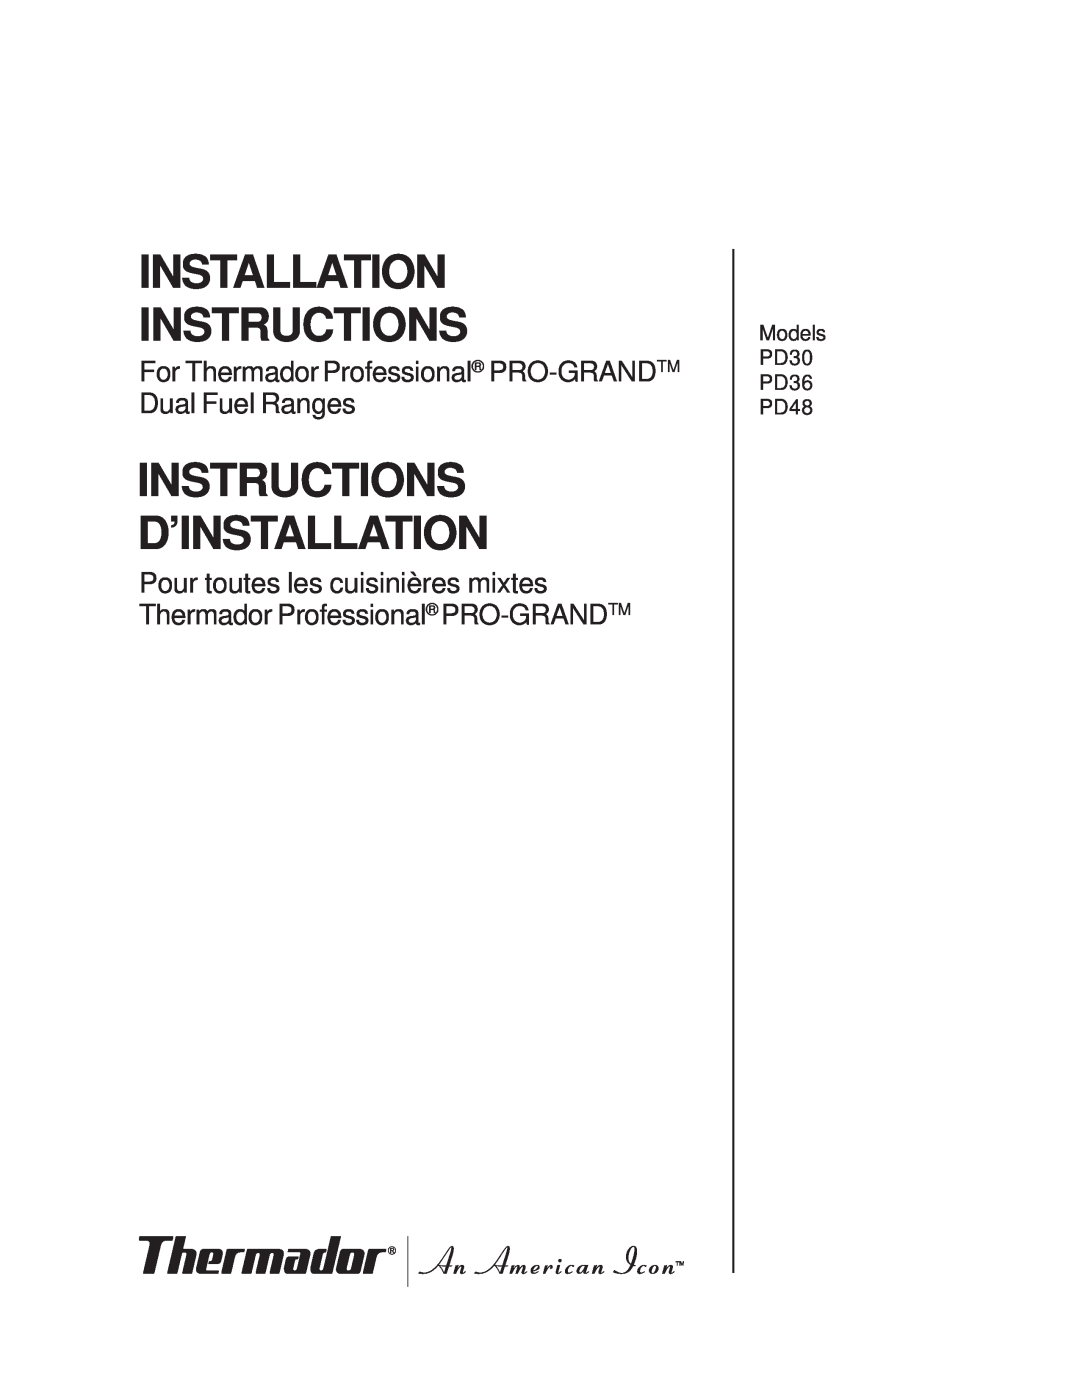 Thermador installation instructions Installation Instructions, Instructions D’Installation, Models PD30 PD36 PD48 